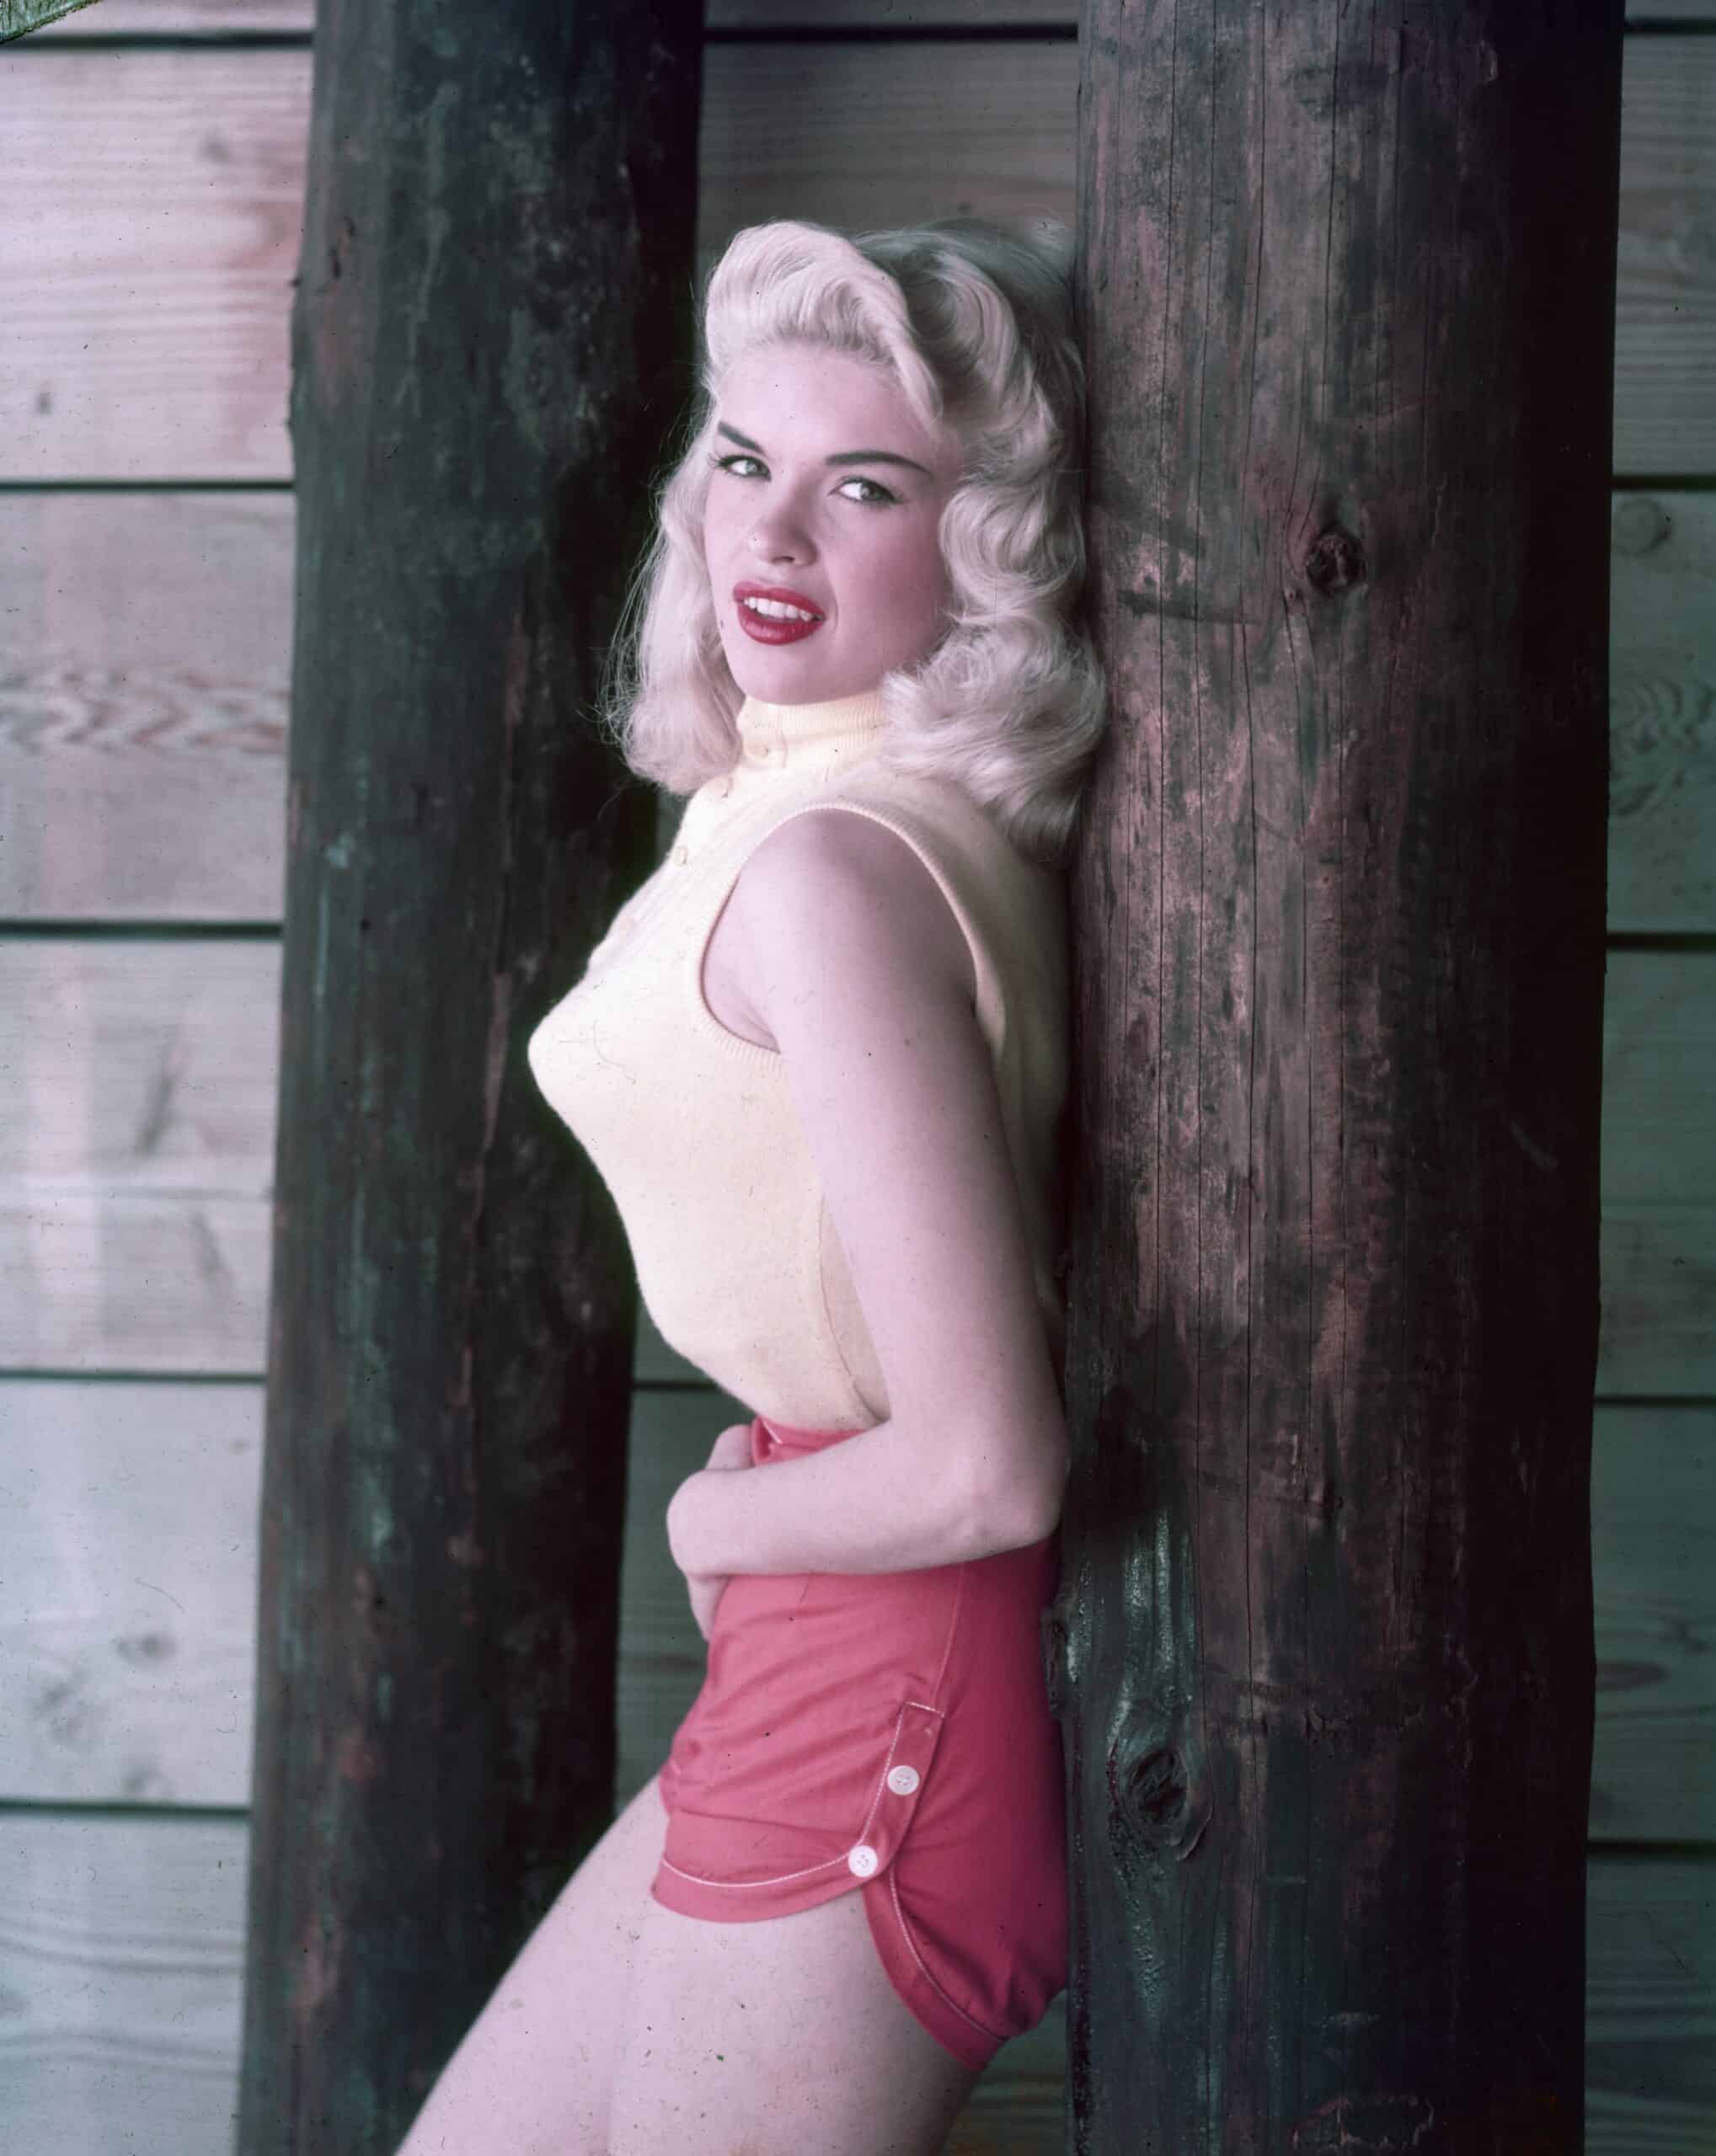 American actor Jayne Mansfield wears a sleeveless sweater, pointy bra and red shorts while leaning against a wooden post. 